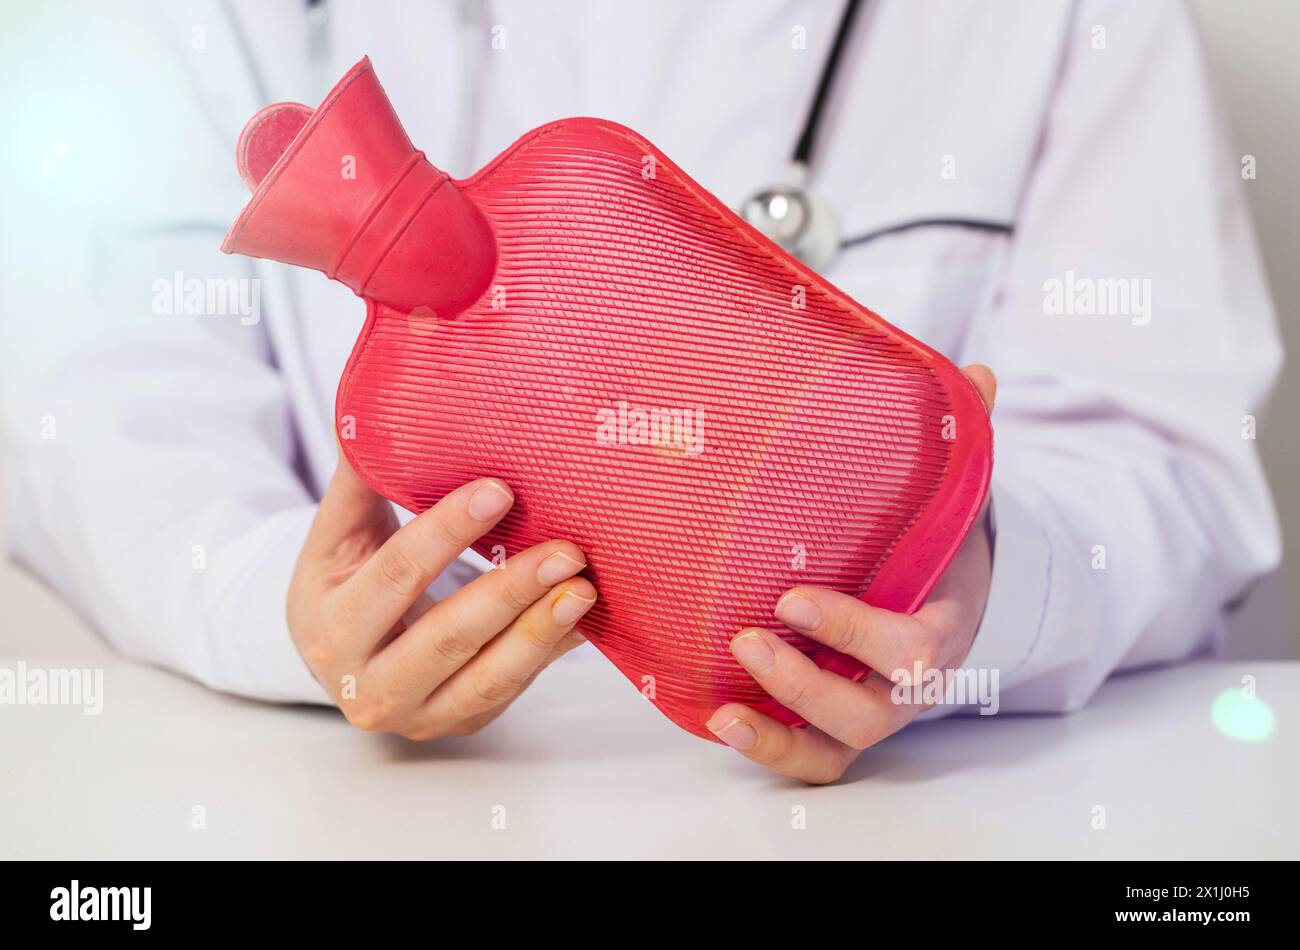 The doctor is holding a red heating pad with hot water in his hands. The concept of heat treatment, muscle relaxation, spasm relief. Stock Photo